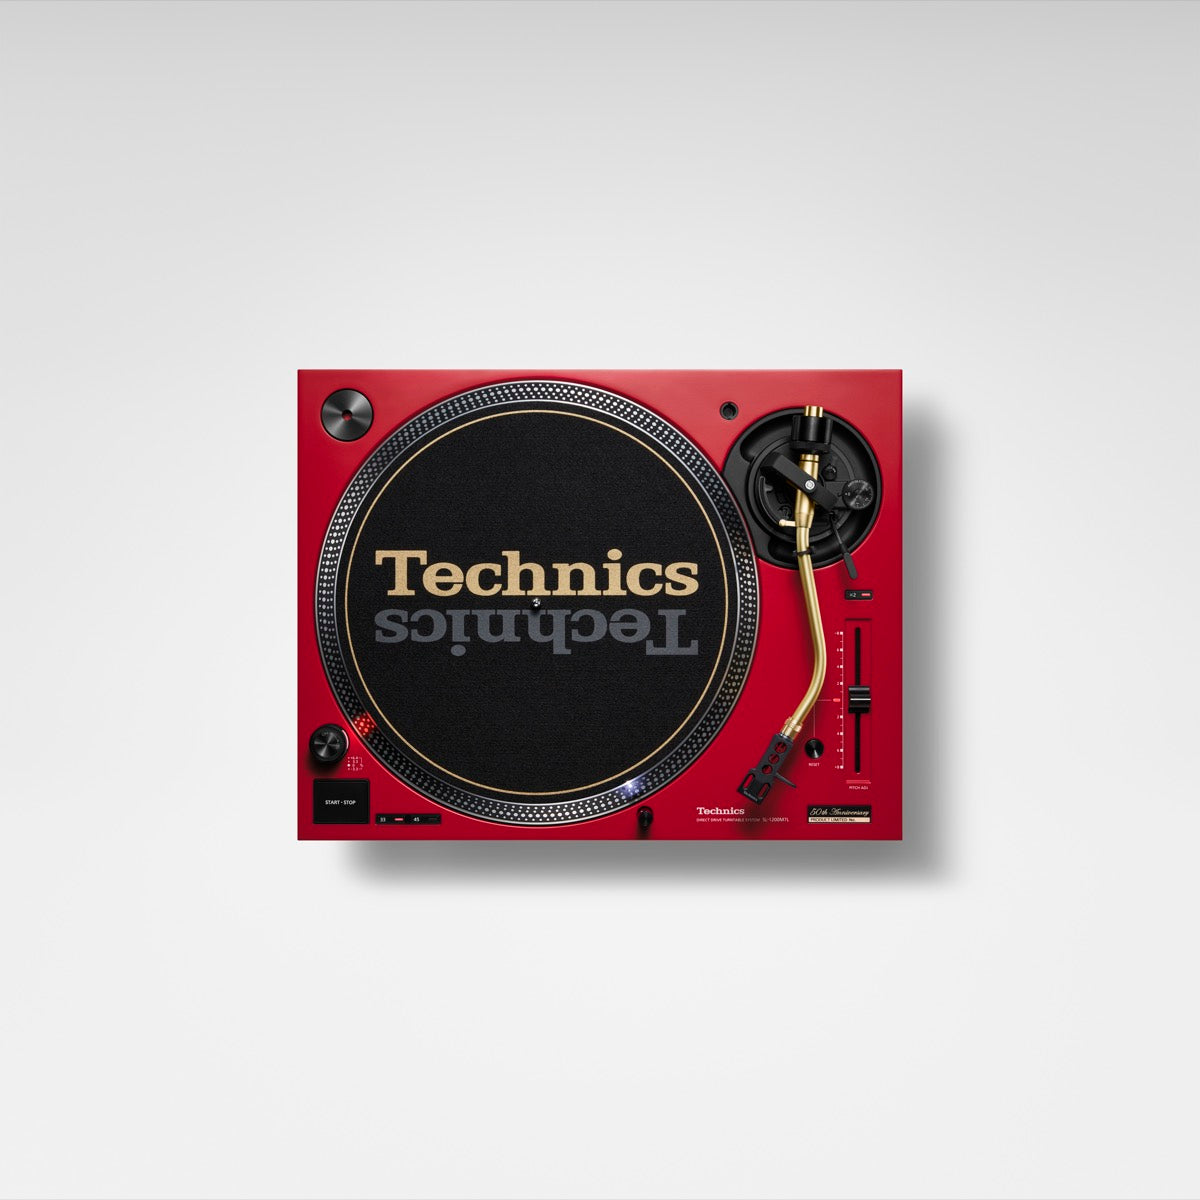 Technics 50th Anniversary SL-1200M7LPR (Red) Direct Drive Turntable with  FREE Oyaide d+ Turntable RCA cable